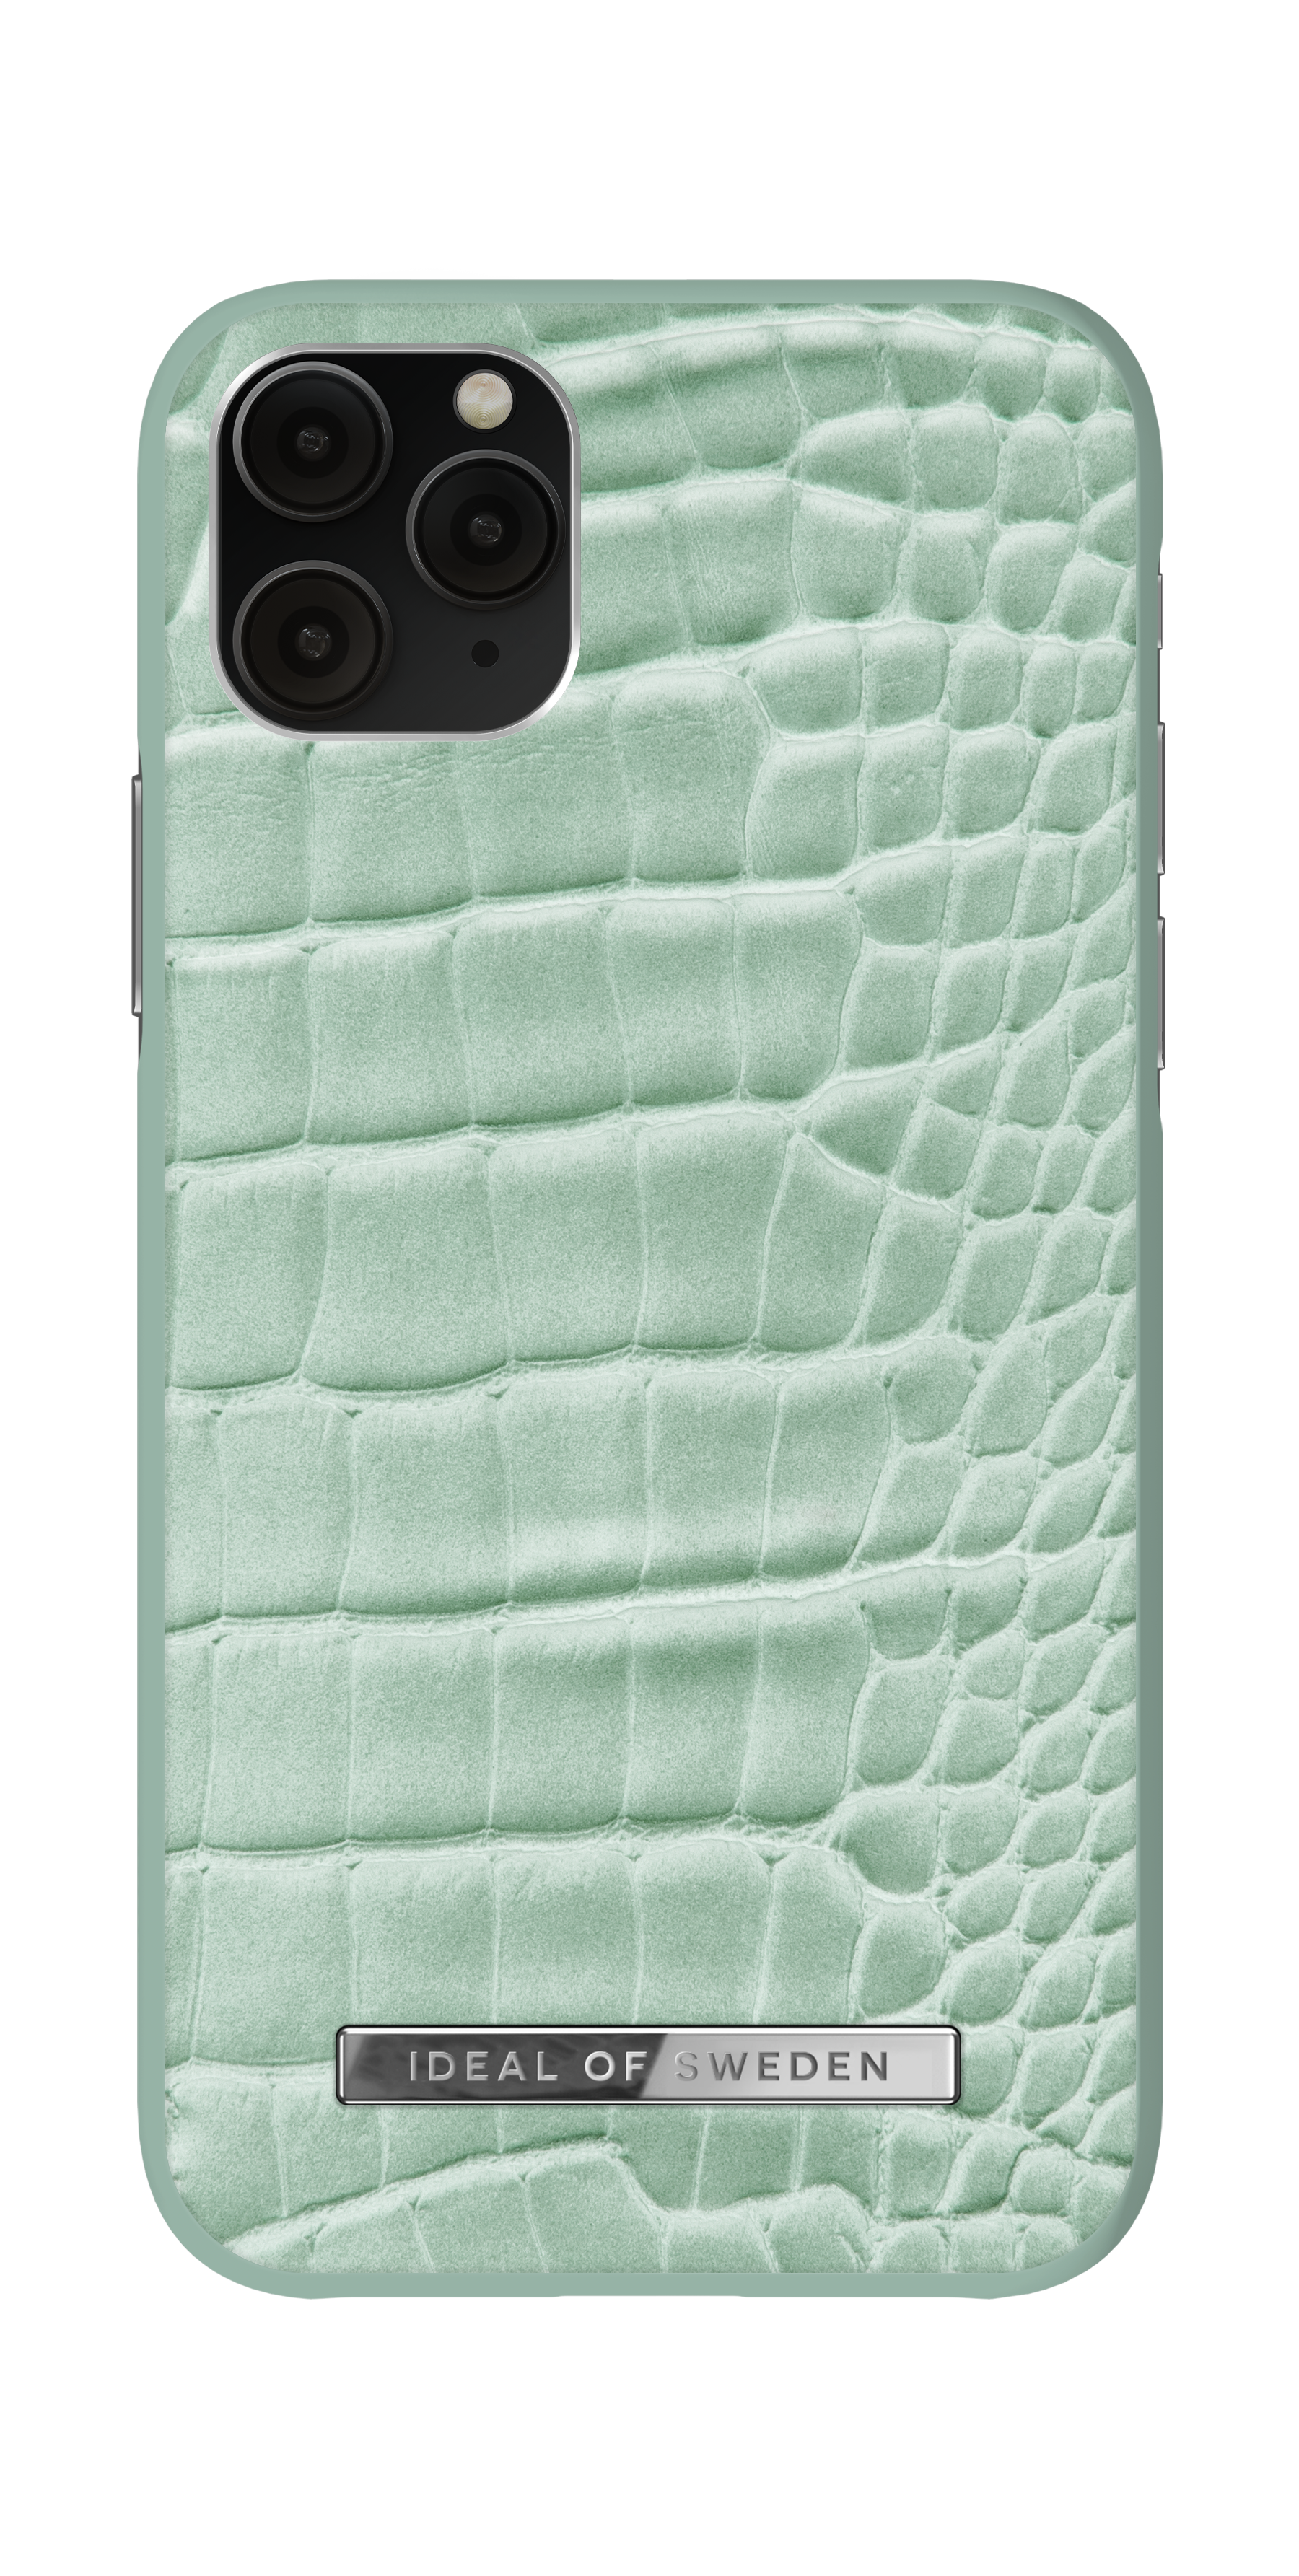 11 Mint iPhone iPhone XS, IDACSS21-I1958-261, iPhone OF Croco IDEAL Apple, X, SWEDEN Backcover, Pro,